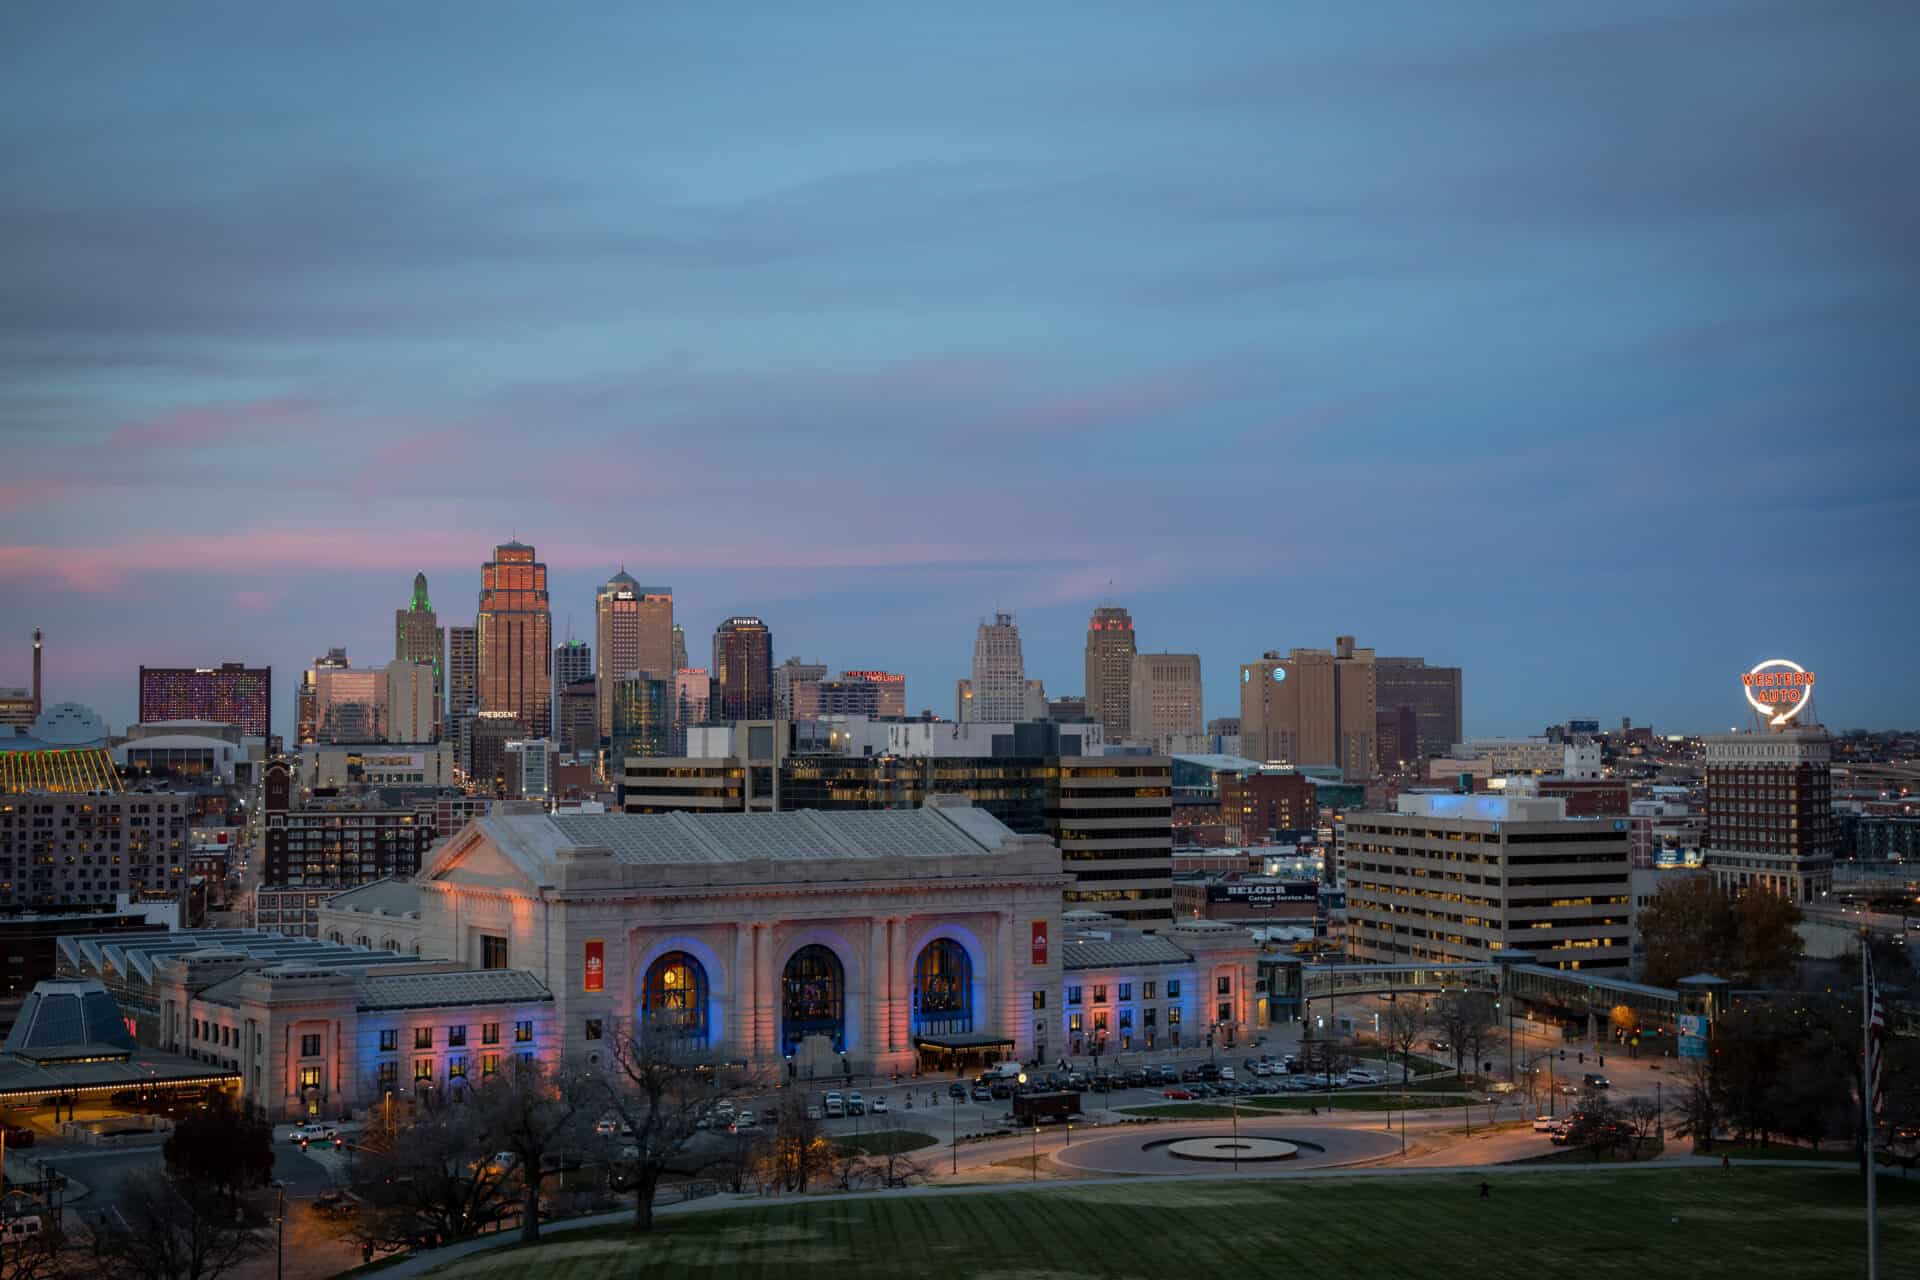 Beautiful view of Kansas City's downtown skyline, including the historic wester auto sign.